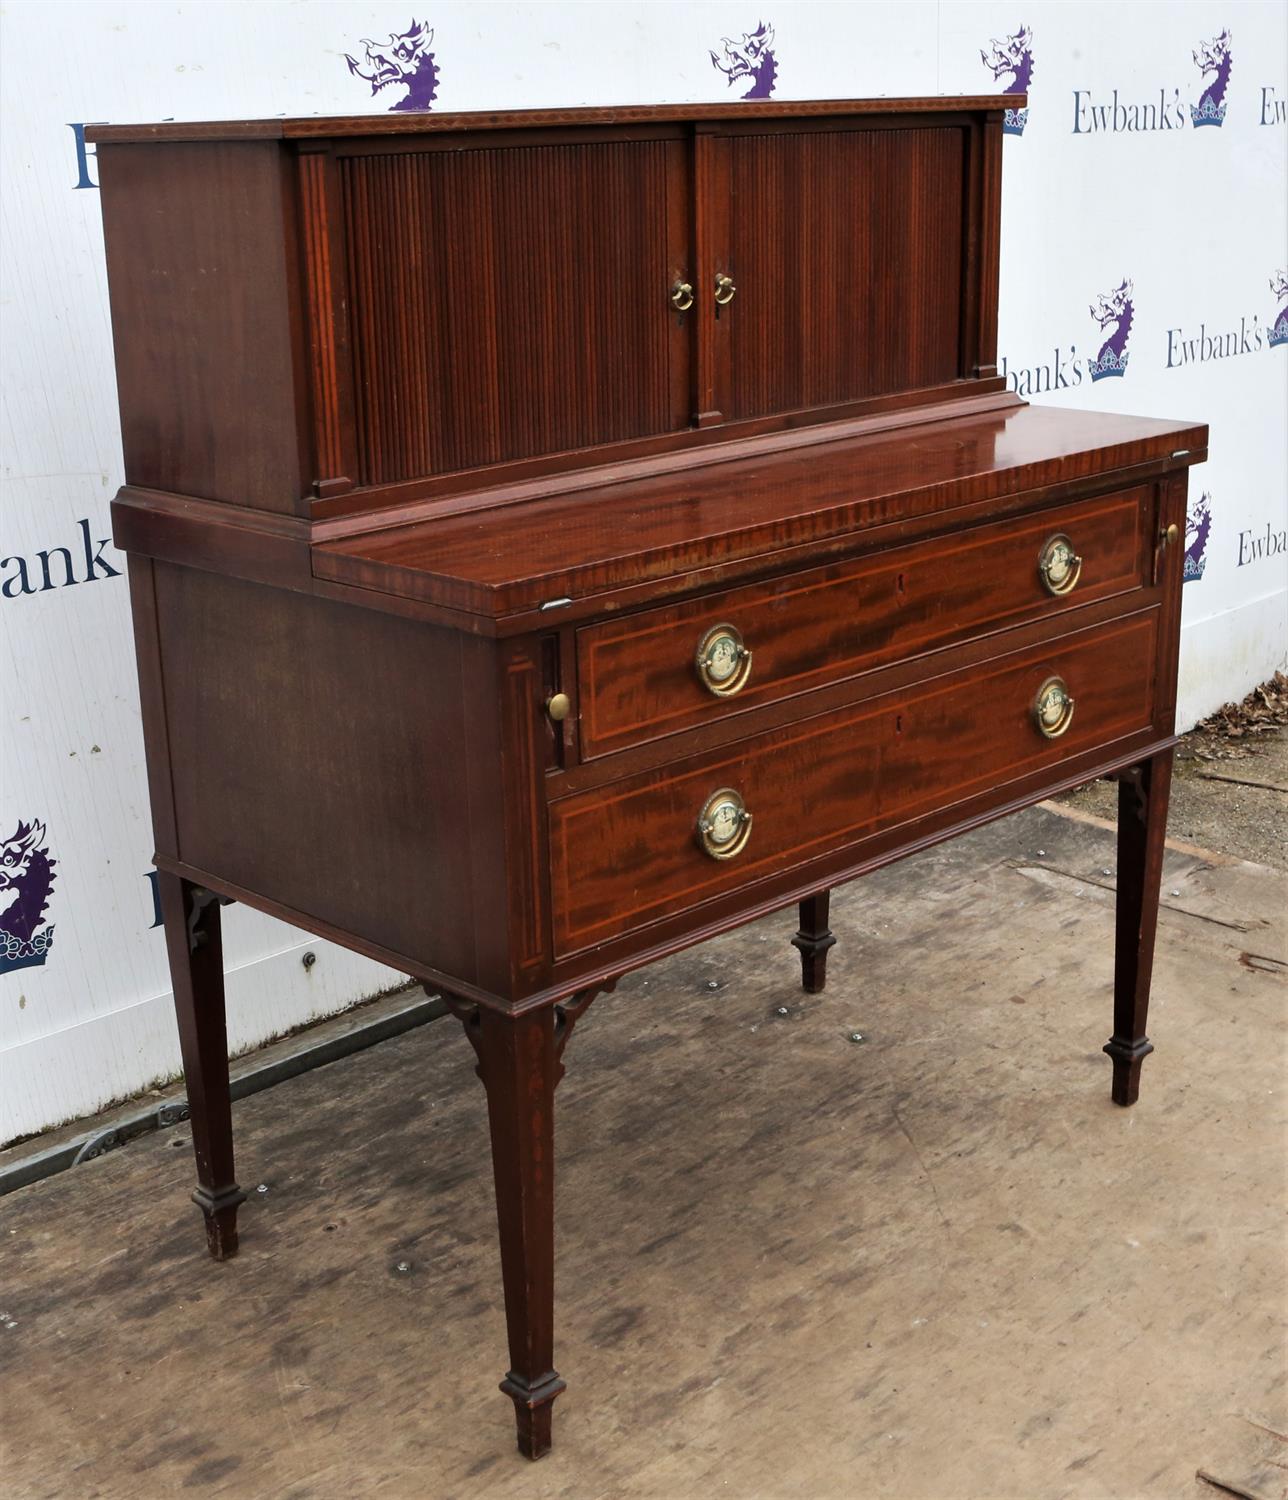 A George III style mahogany writing cabinet, Continental, the upper section with tambour doors - Image 4 of 6